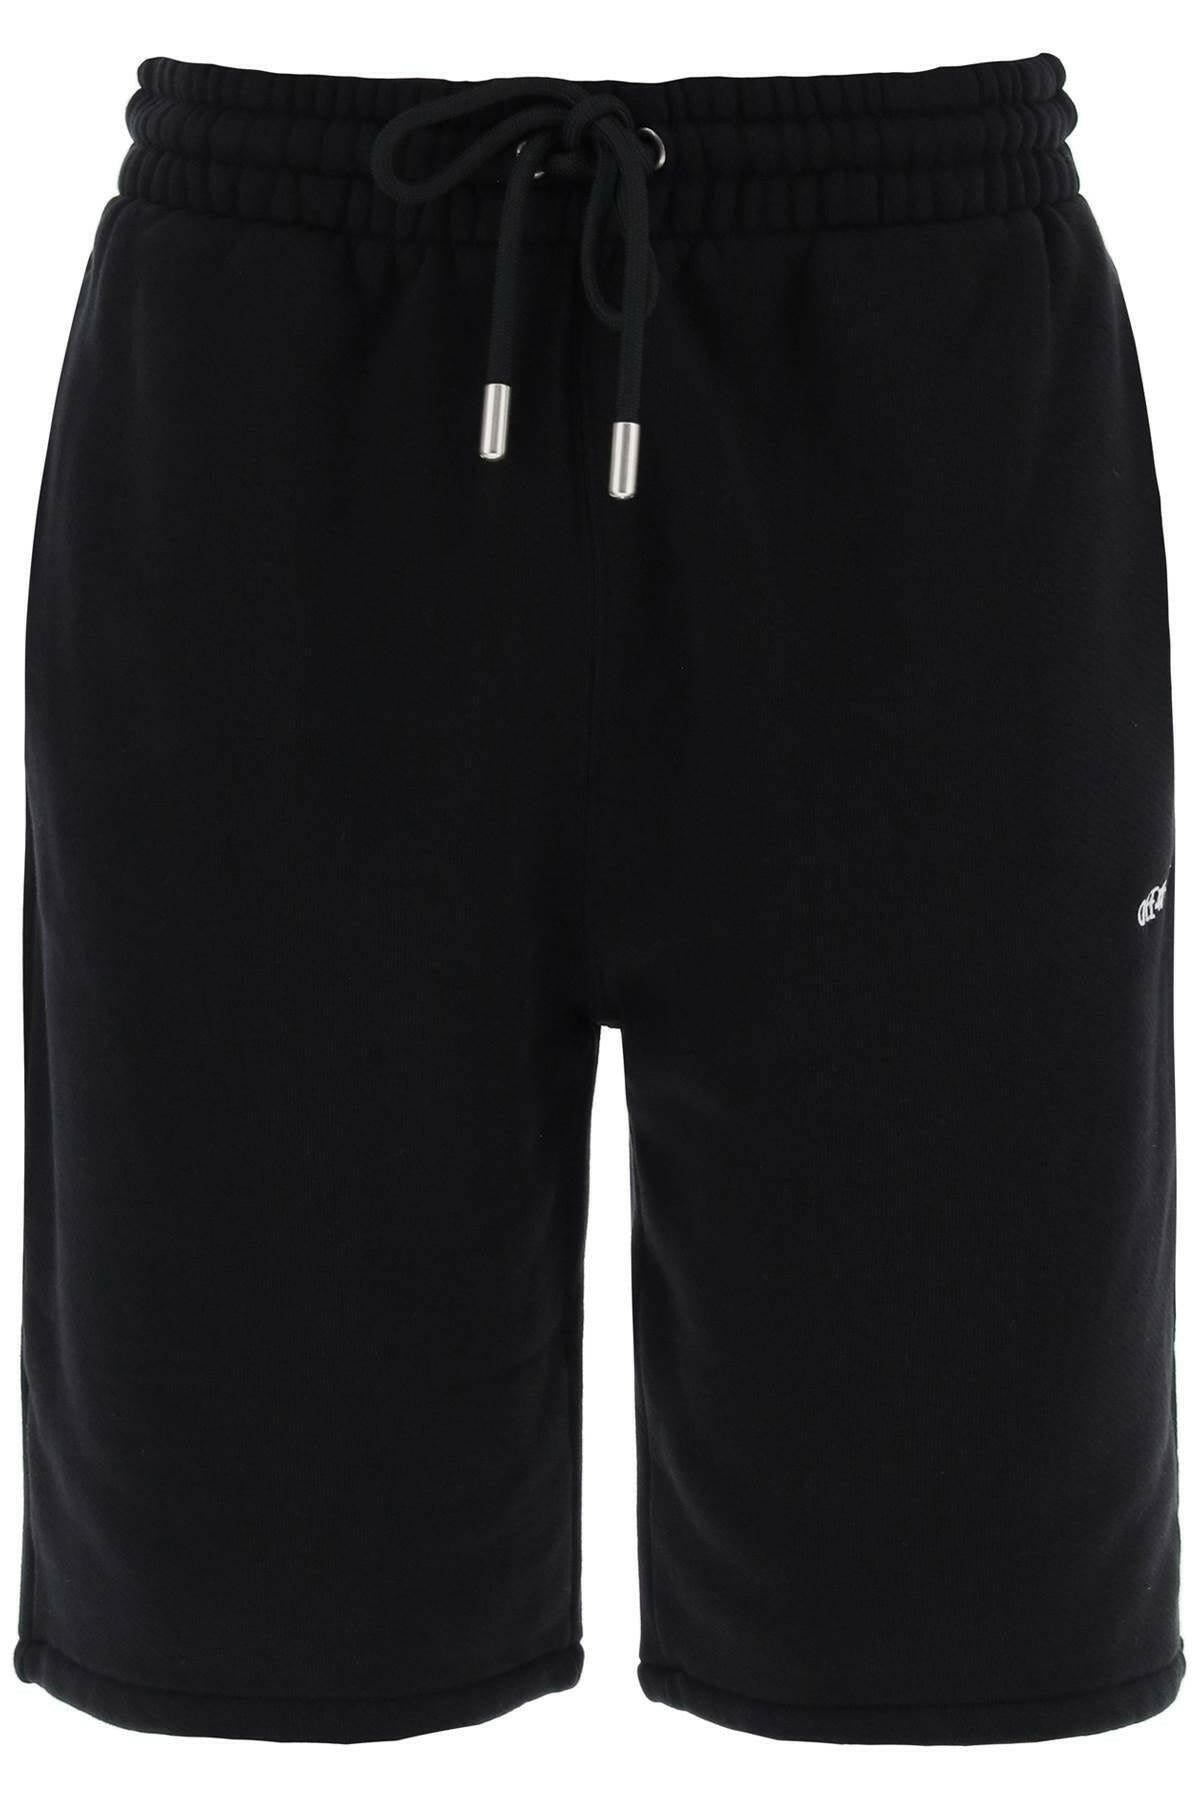 Off White "Sporty Bermuda Shorts With Embroidered Arrow - JOHN JULIA